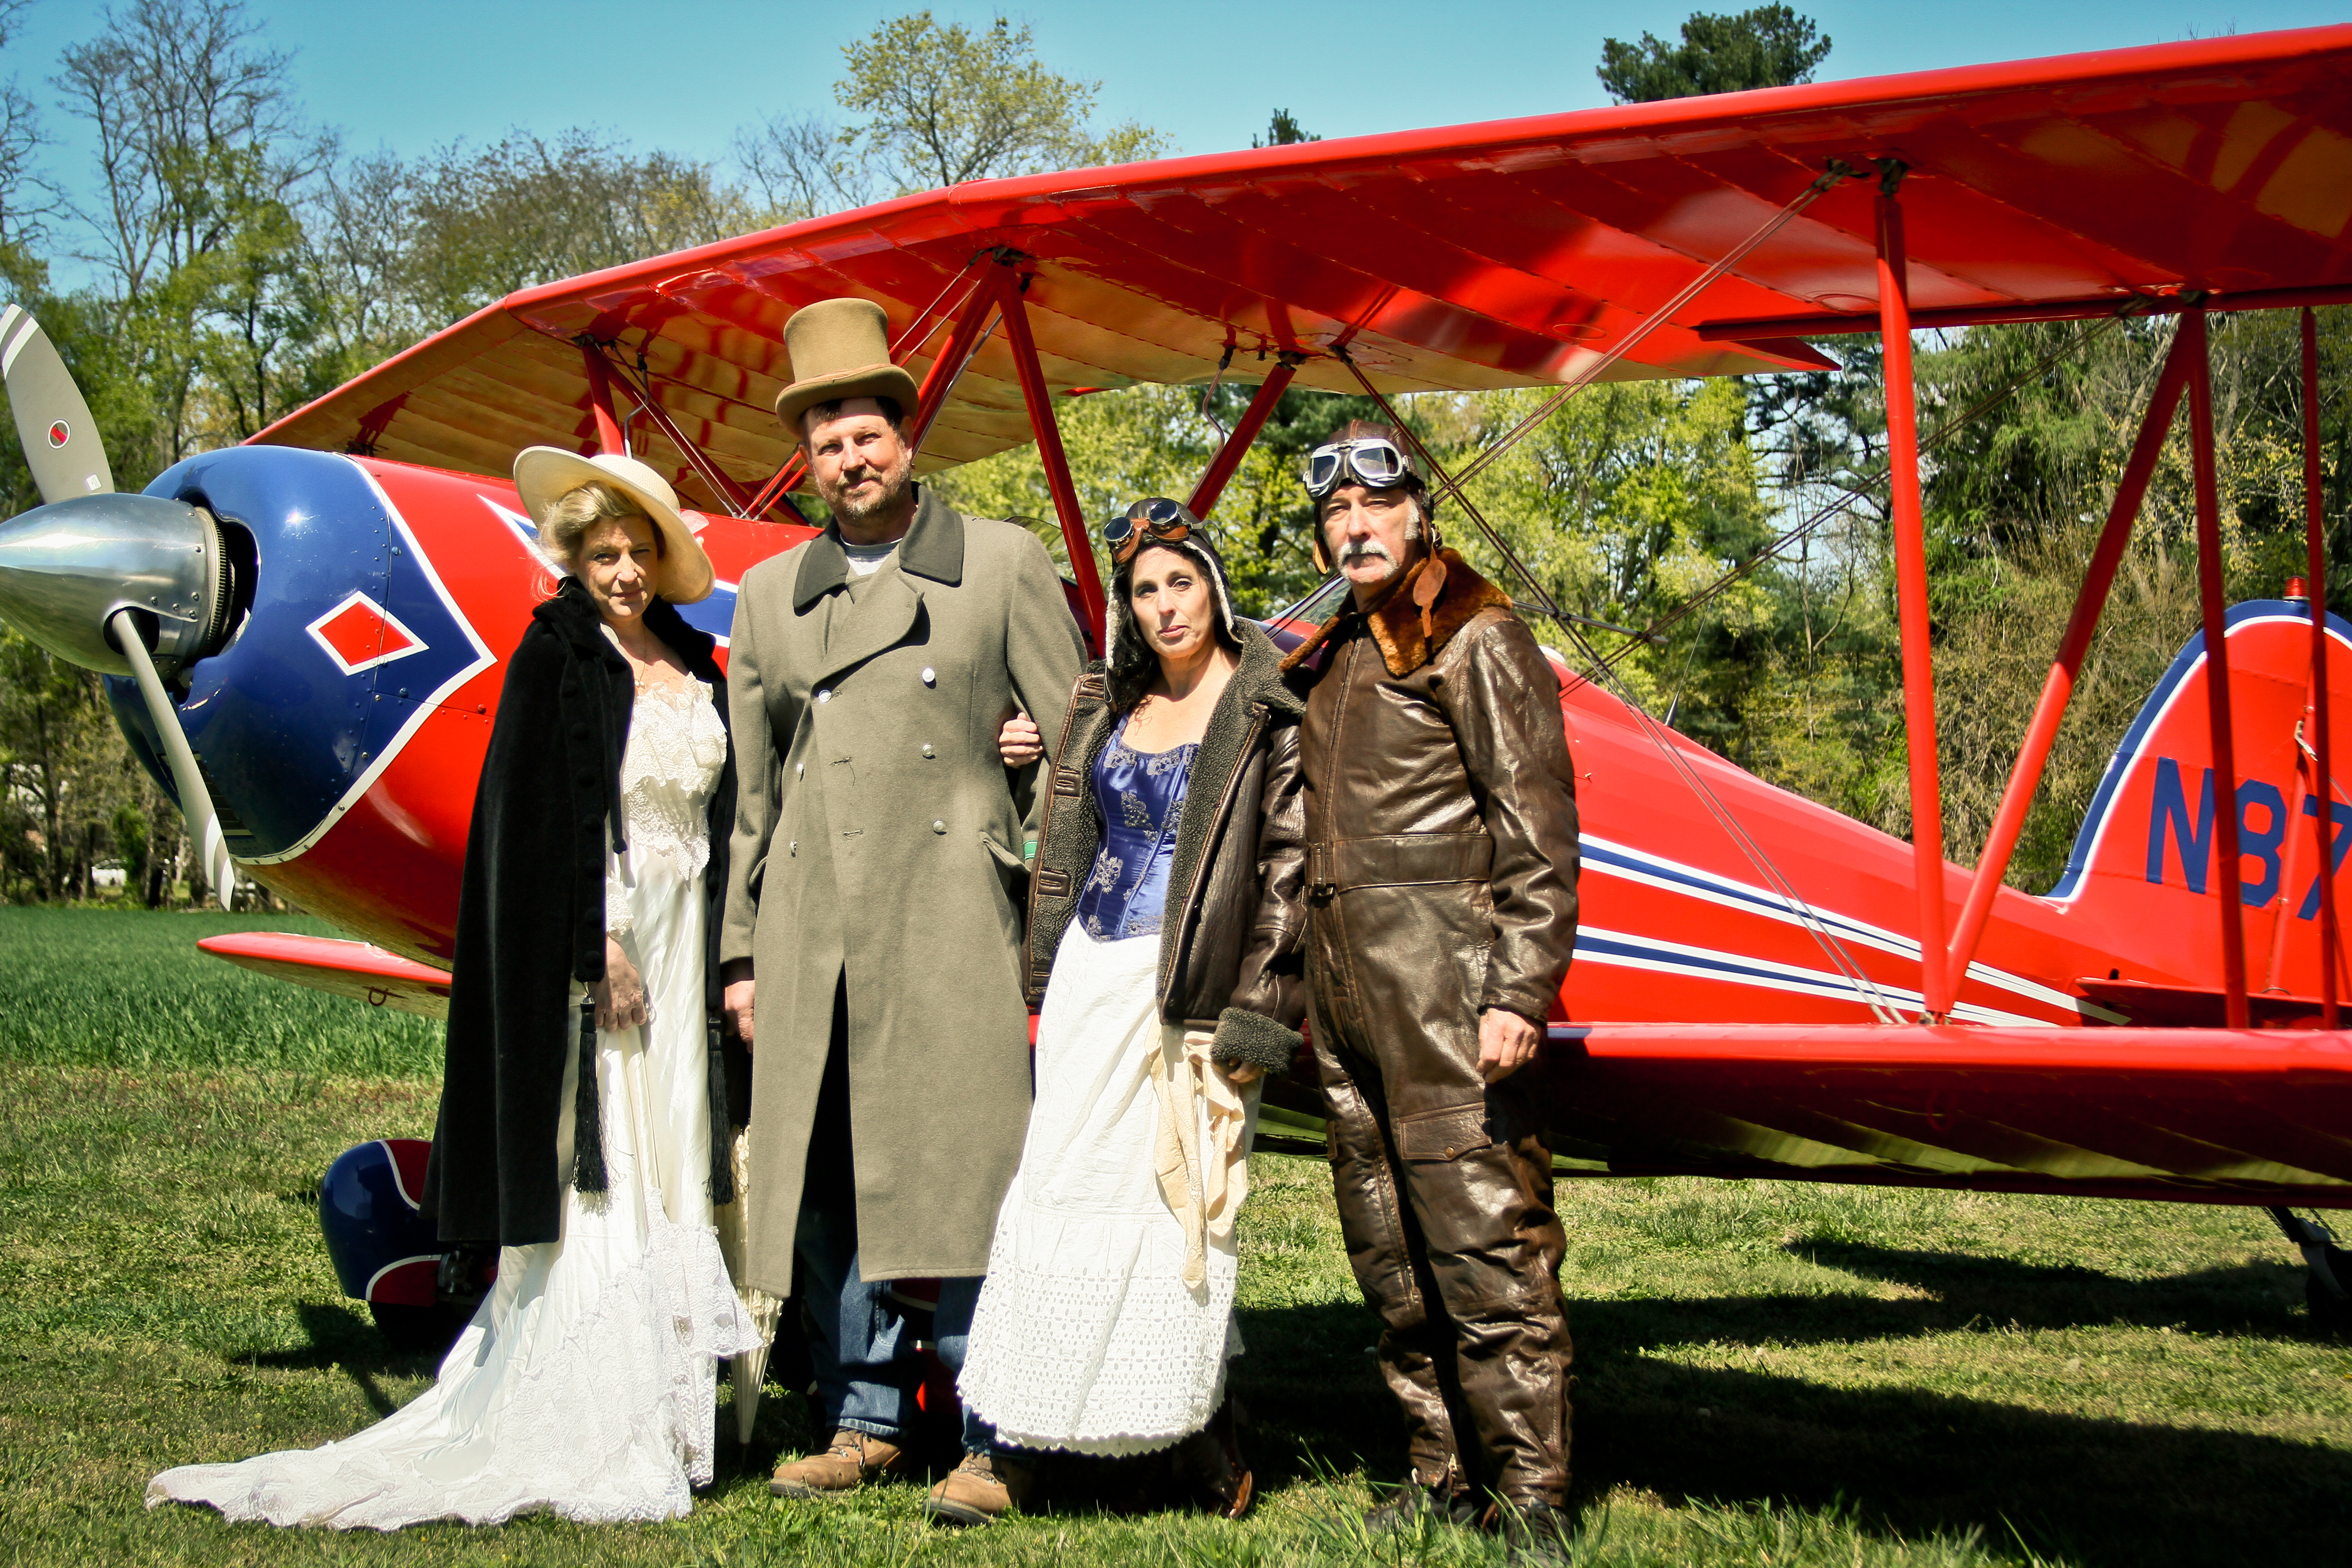 A lovely day to fly.... Original Outfits & Steampunk Works Designs for Film, Books & Music Video